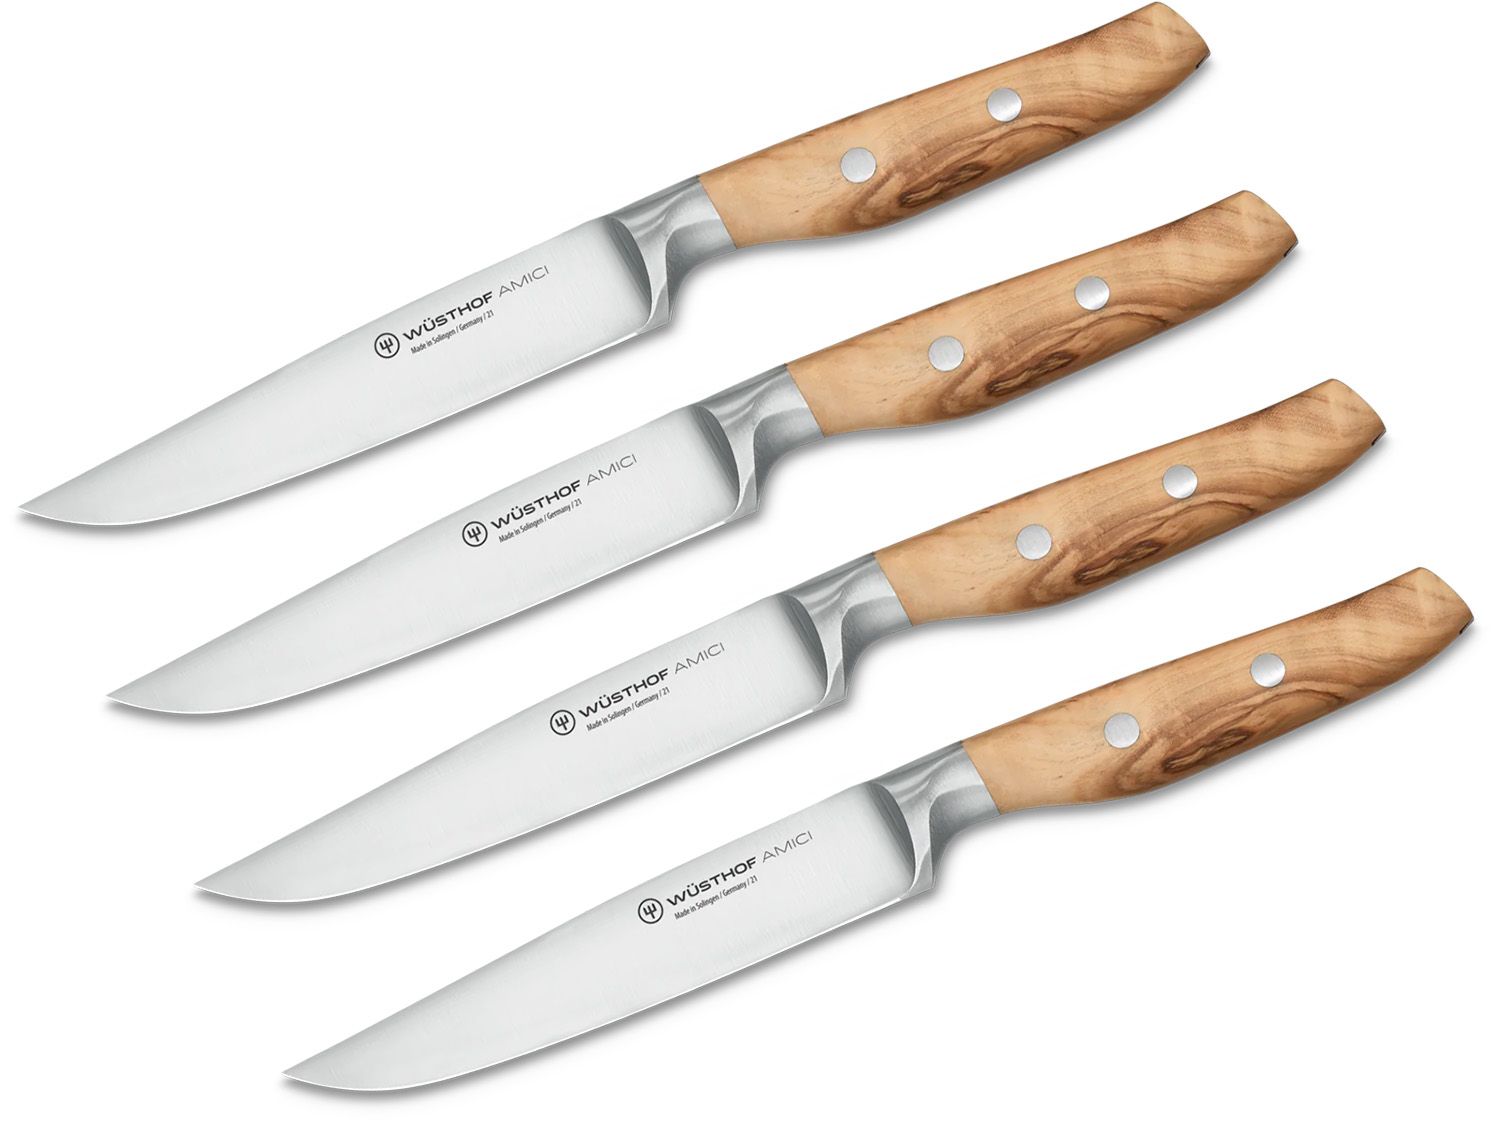 Wusthof Amici 6 inch Chef's Knife, Olive Wood Handles